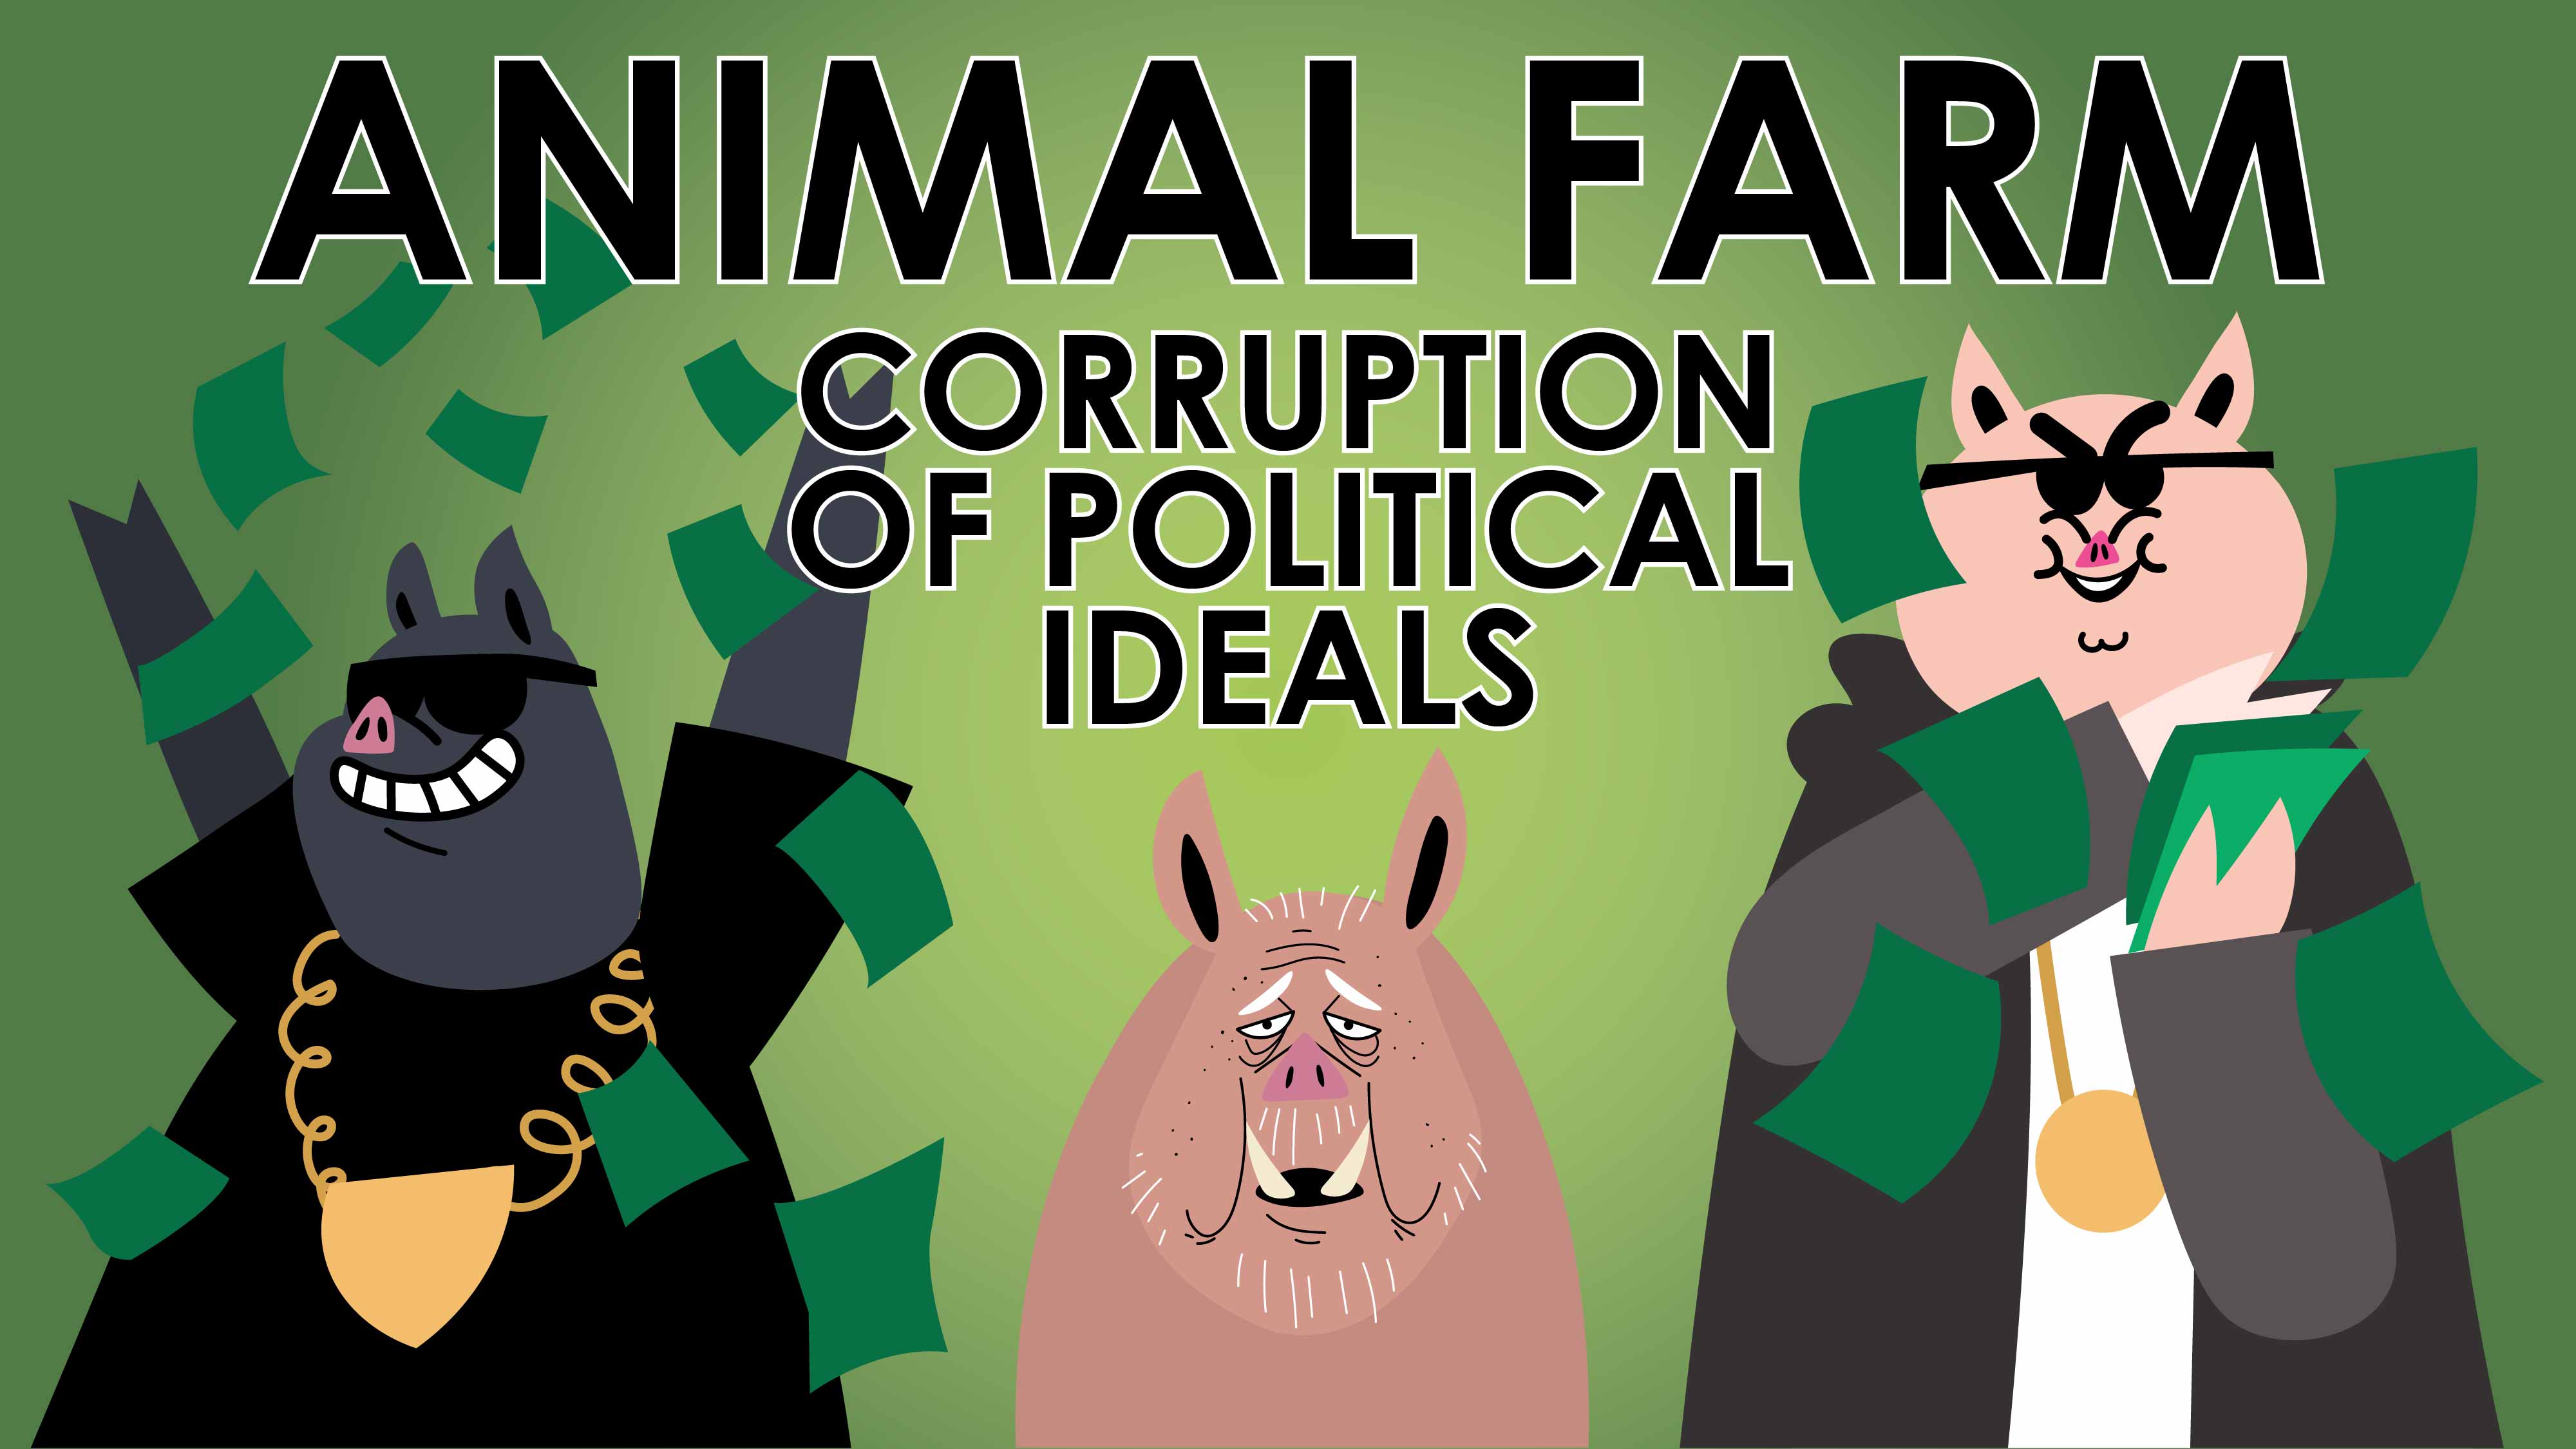 Animal Farm - George Orwell - Theme of the Corruption of Political Ideals - Powering Through Prose Series